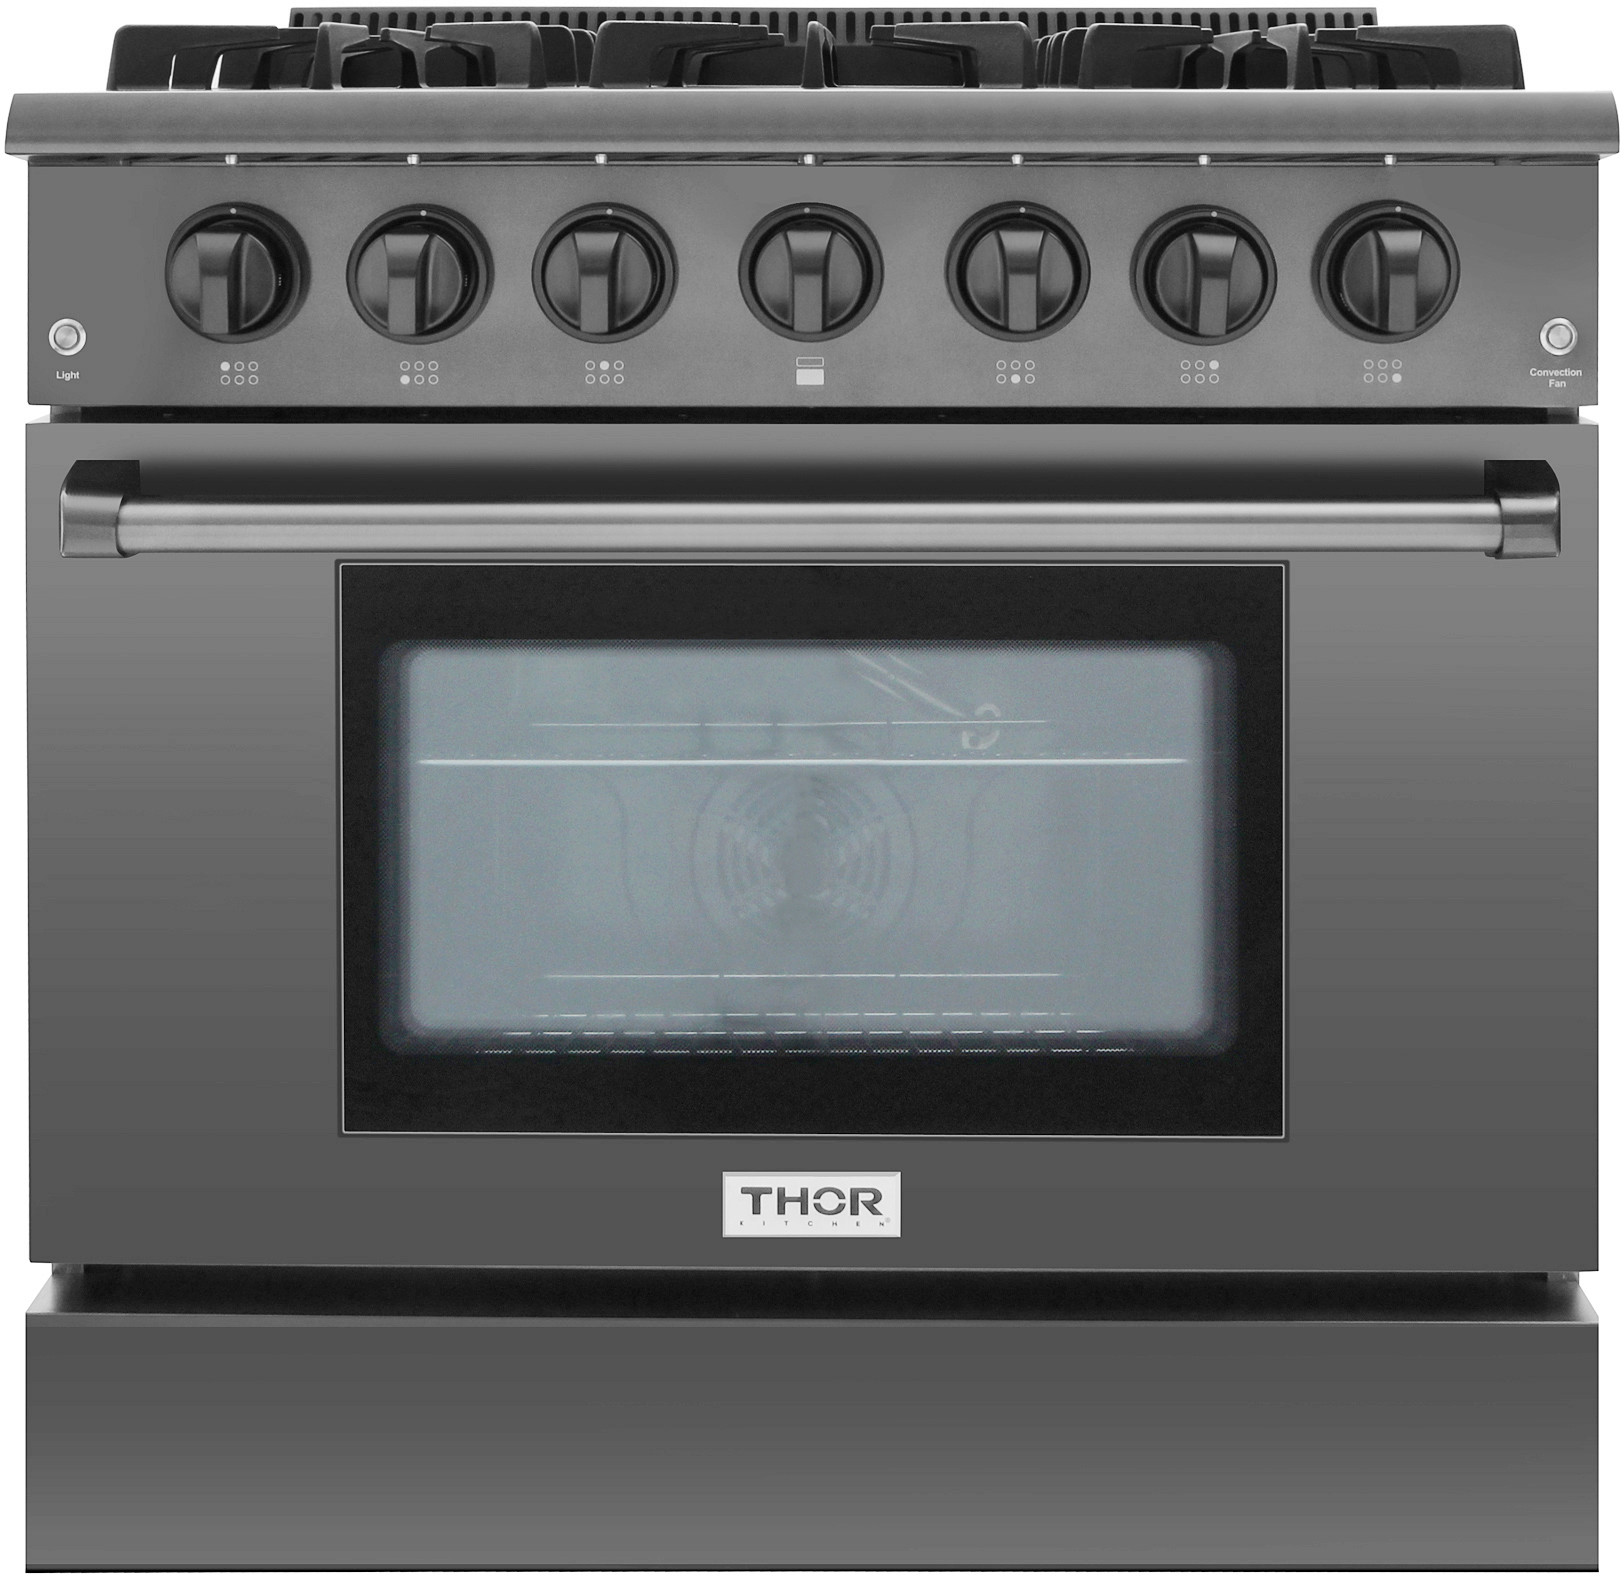 6 Burners & Cast Iron Grates New Thor Kitchen 36 Pro-Style Gas Range HRG3618-BS with 5.2 cu.ft Convection Oven in Black Stainless Steel Cast-Iron Reversible Griddle 